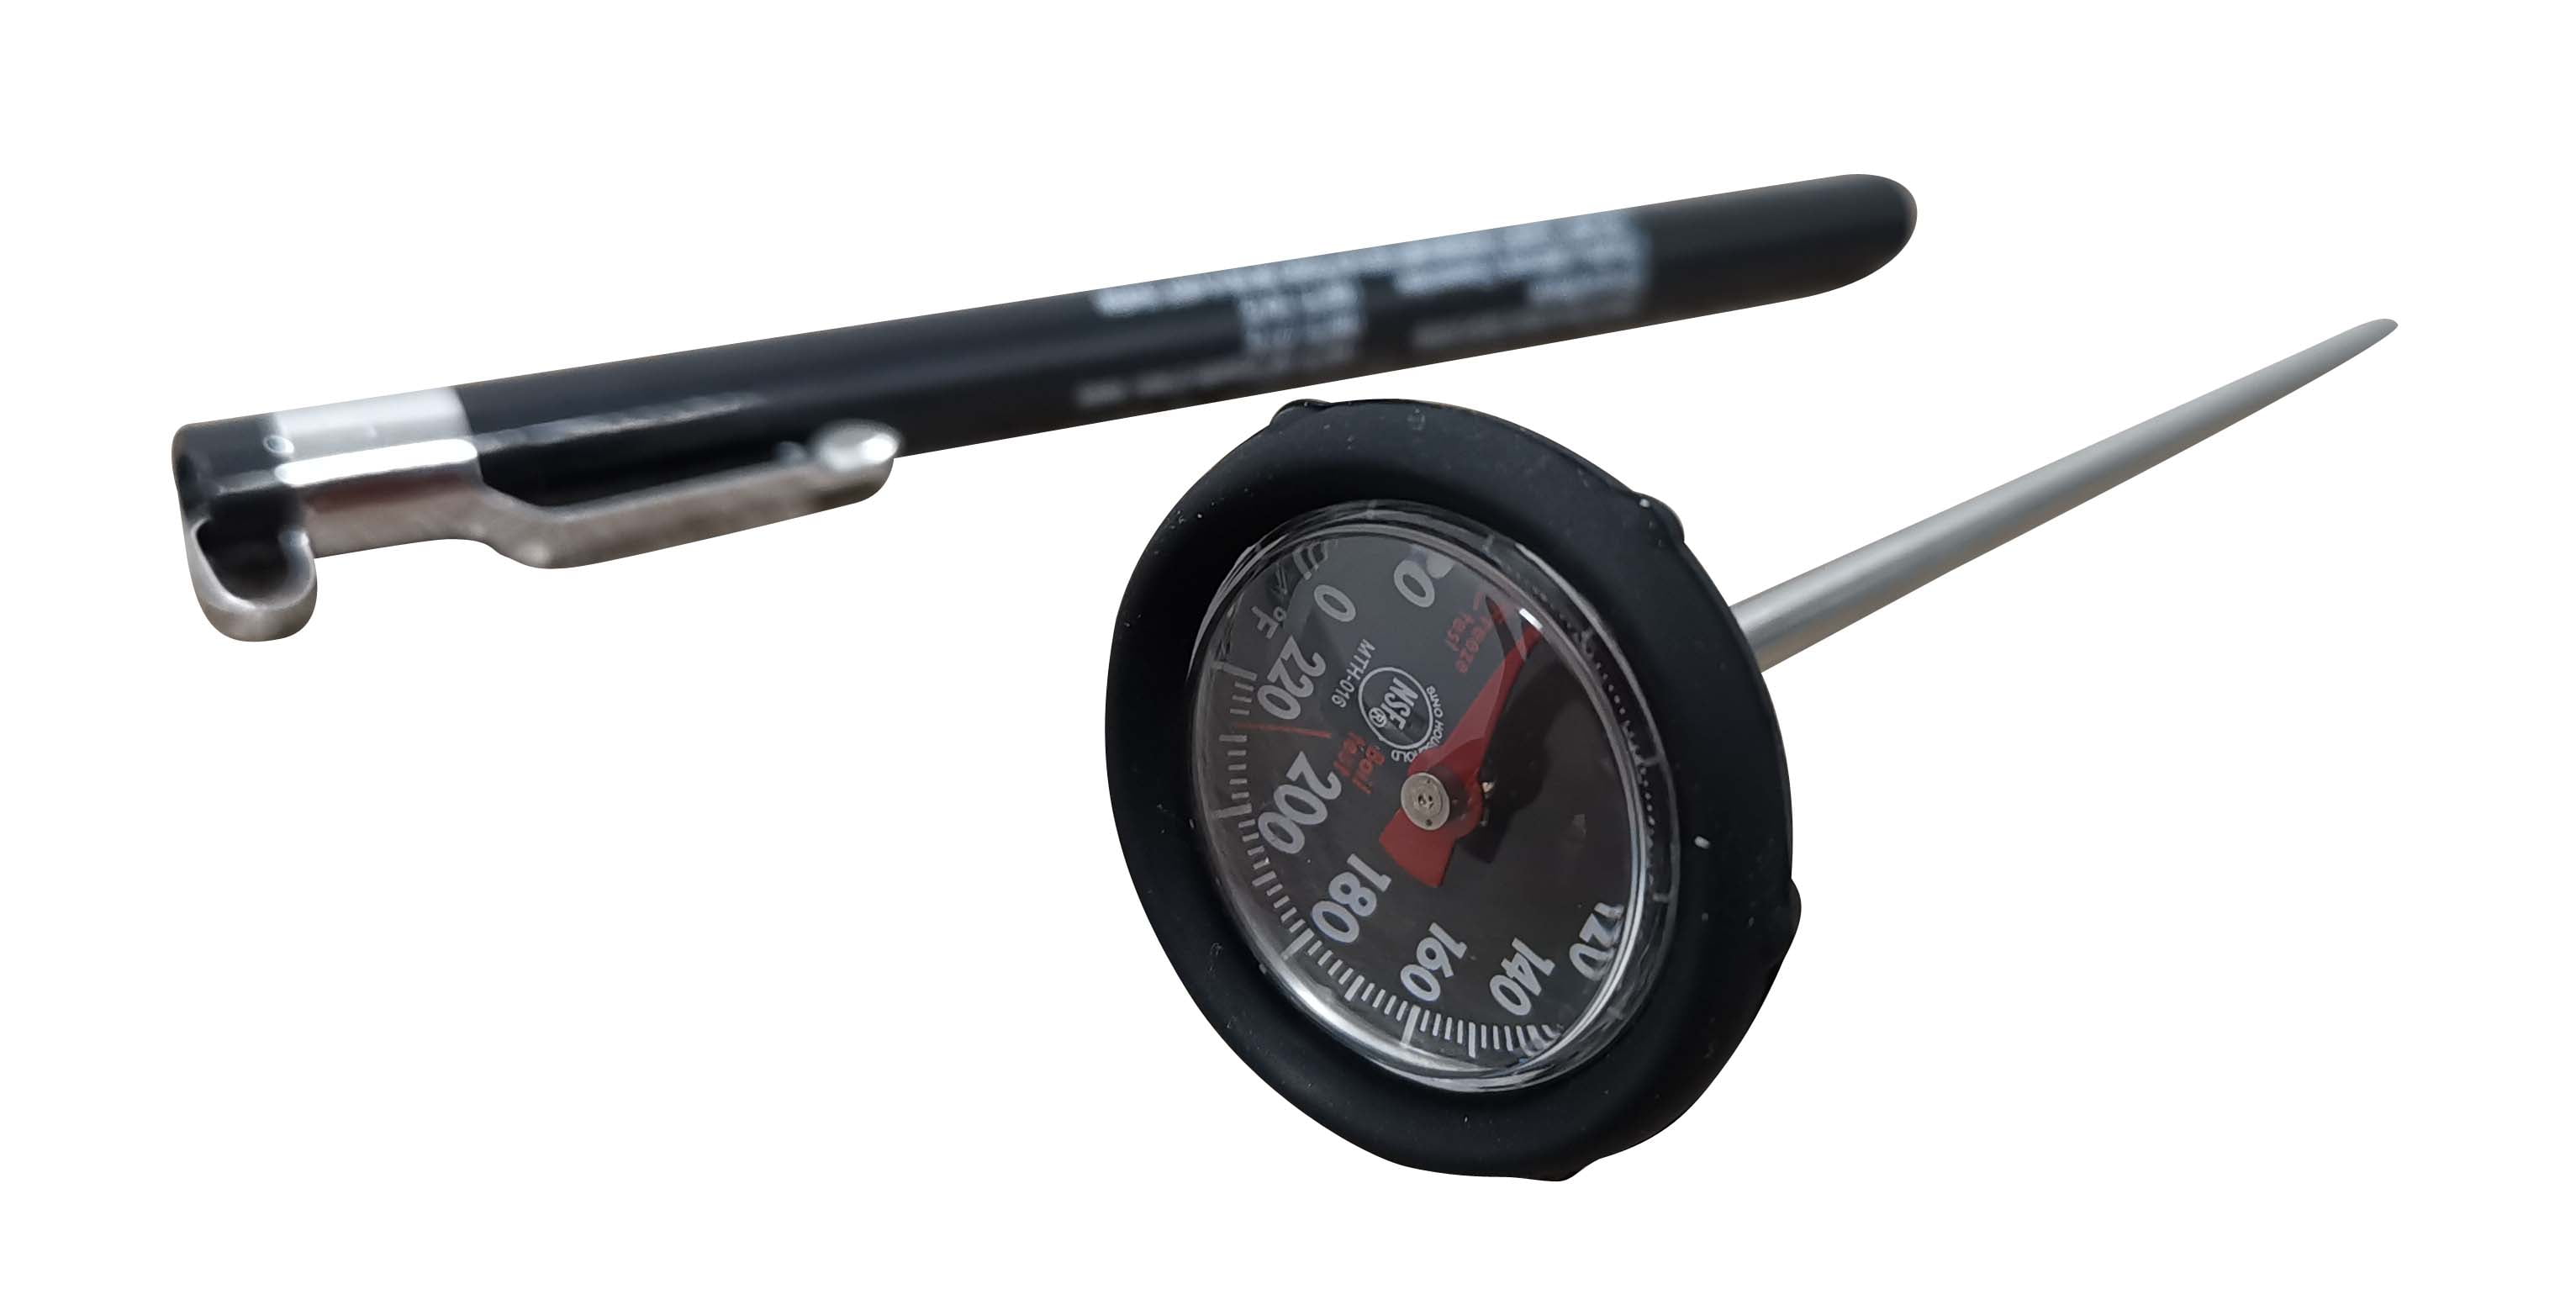 Mainstays Stainless Steel Meat Thermometer, 1 pc - Harris Teeter